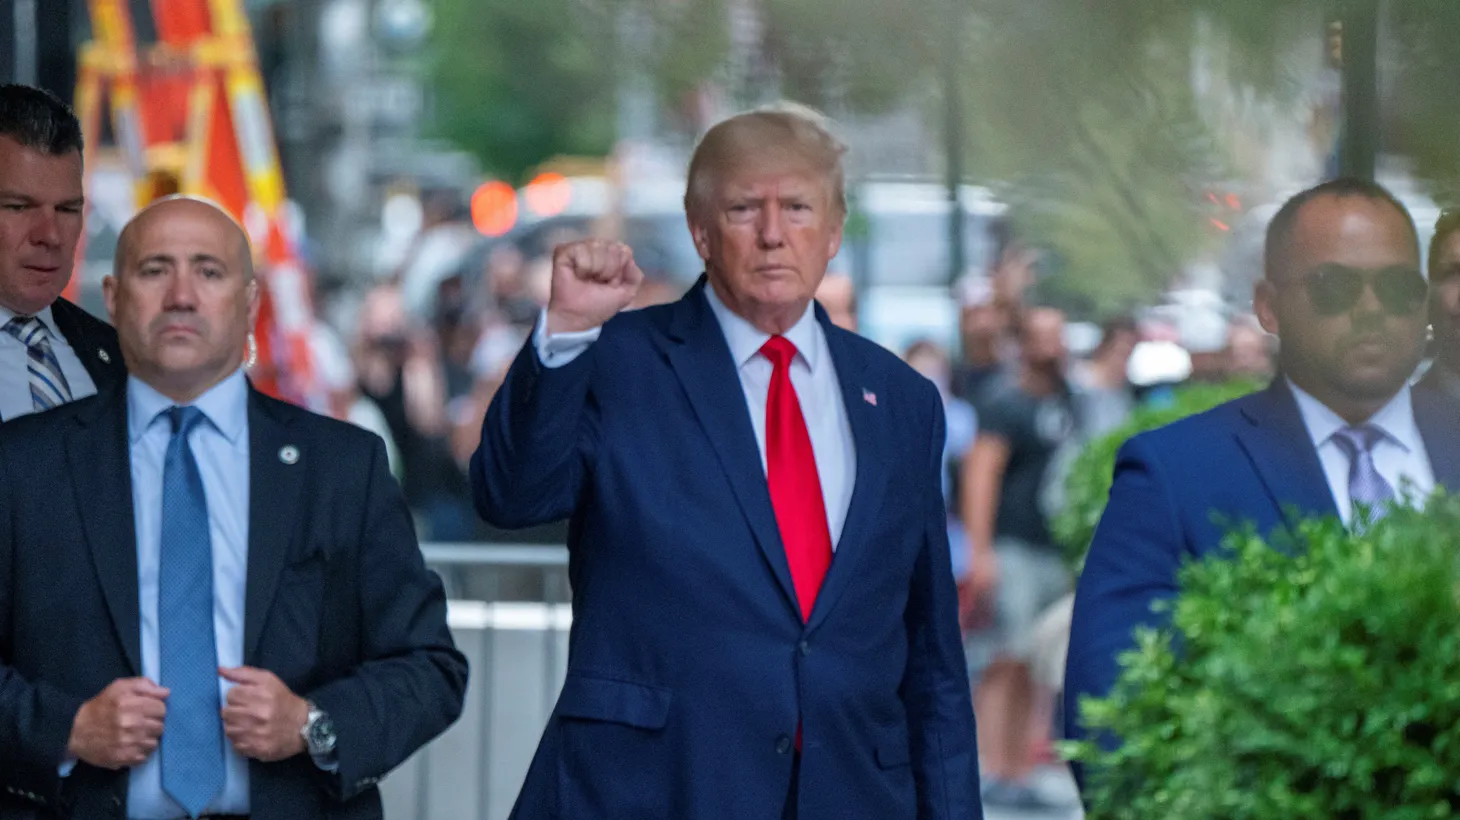 Donald Trump departs Trump Tower two days after FBI agents raided his Mar-a-Lago Palm Beach home, in New York City, New York, U.S., August 10, 2022.